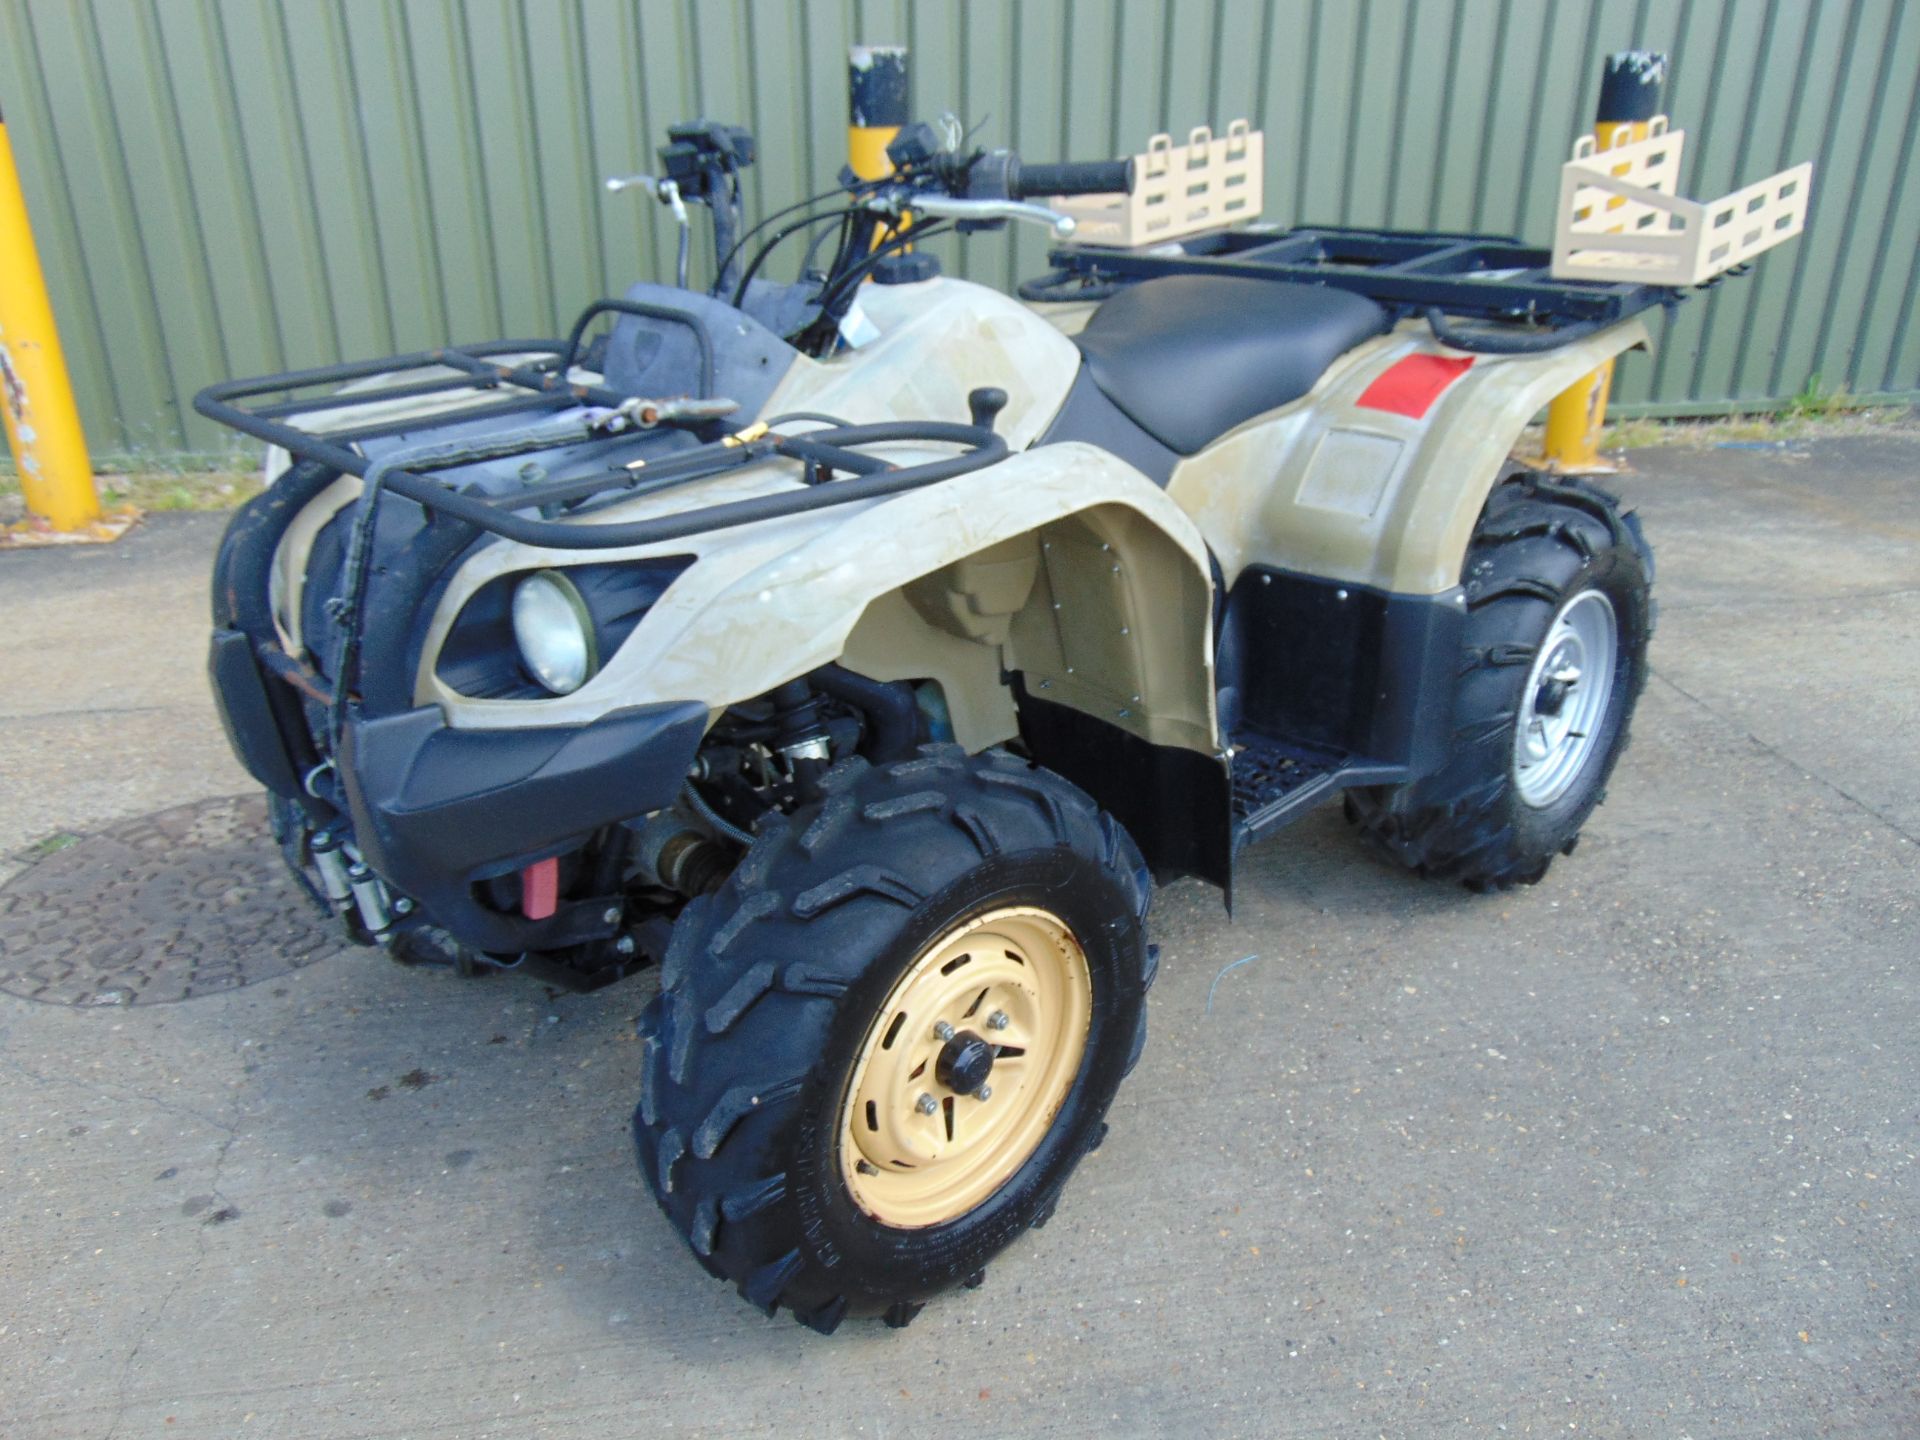 Military Specification Yamaha Grizzly 450 4 x 4 ATV Quad Bike Showing 223 hrs